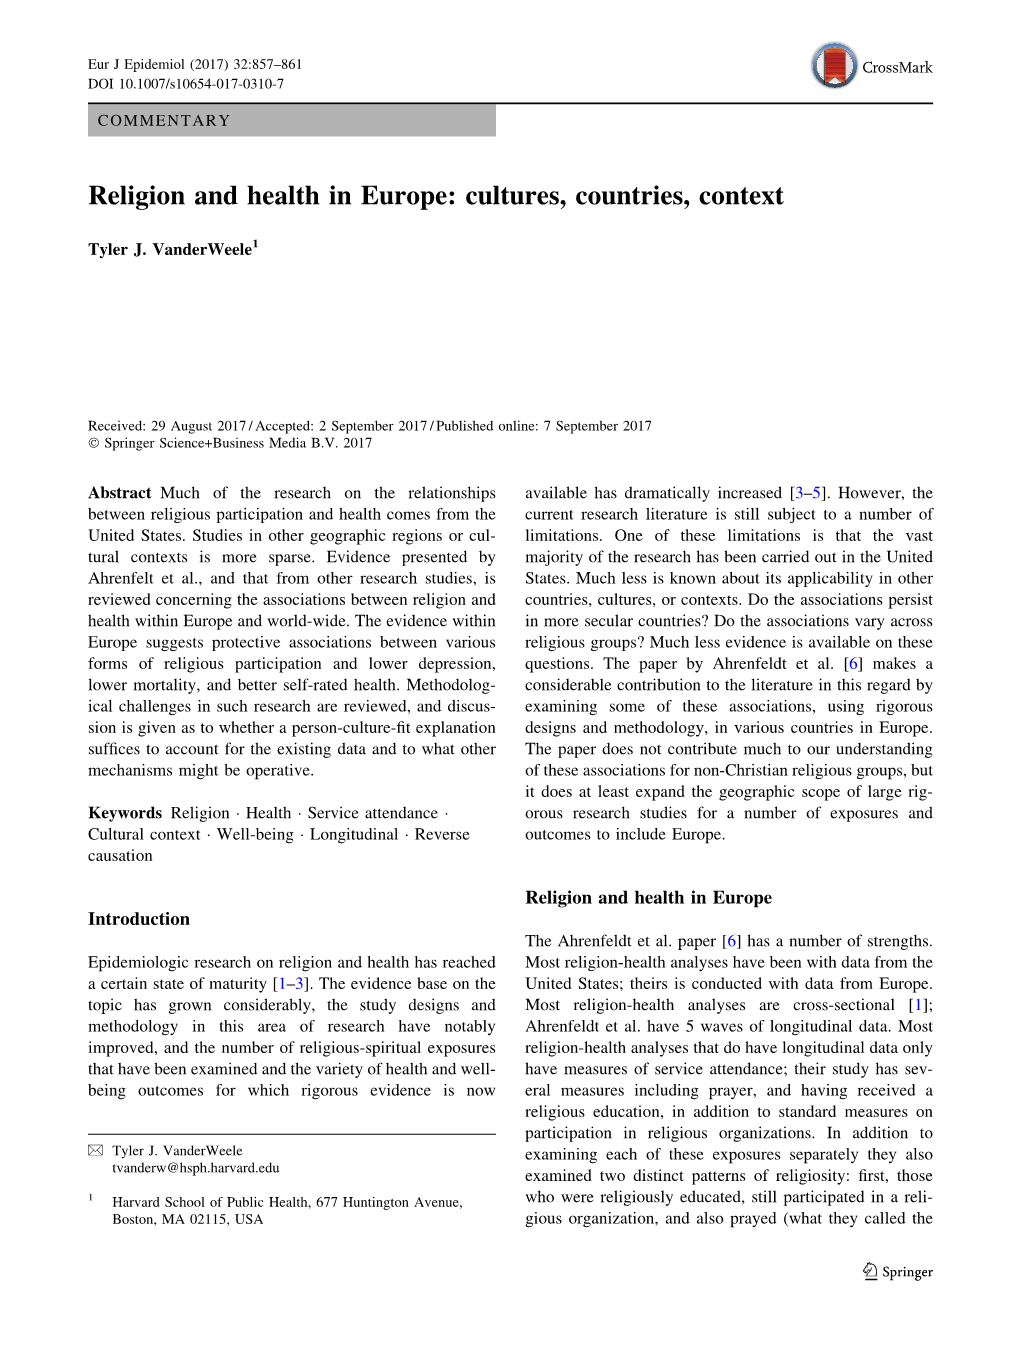 Religion and Health in Europe: Cultures, Countries, Context